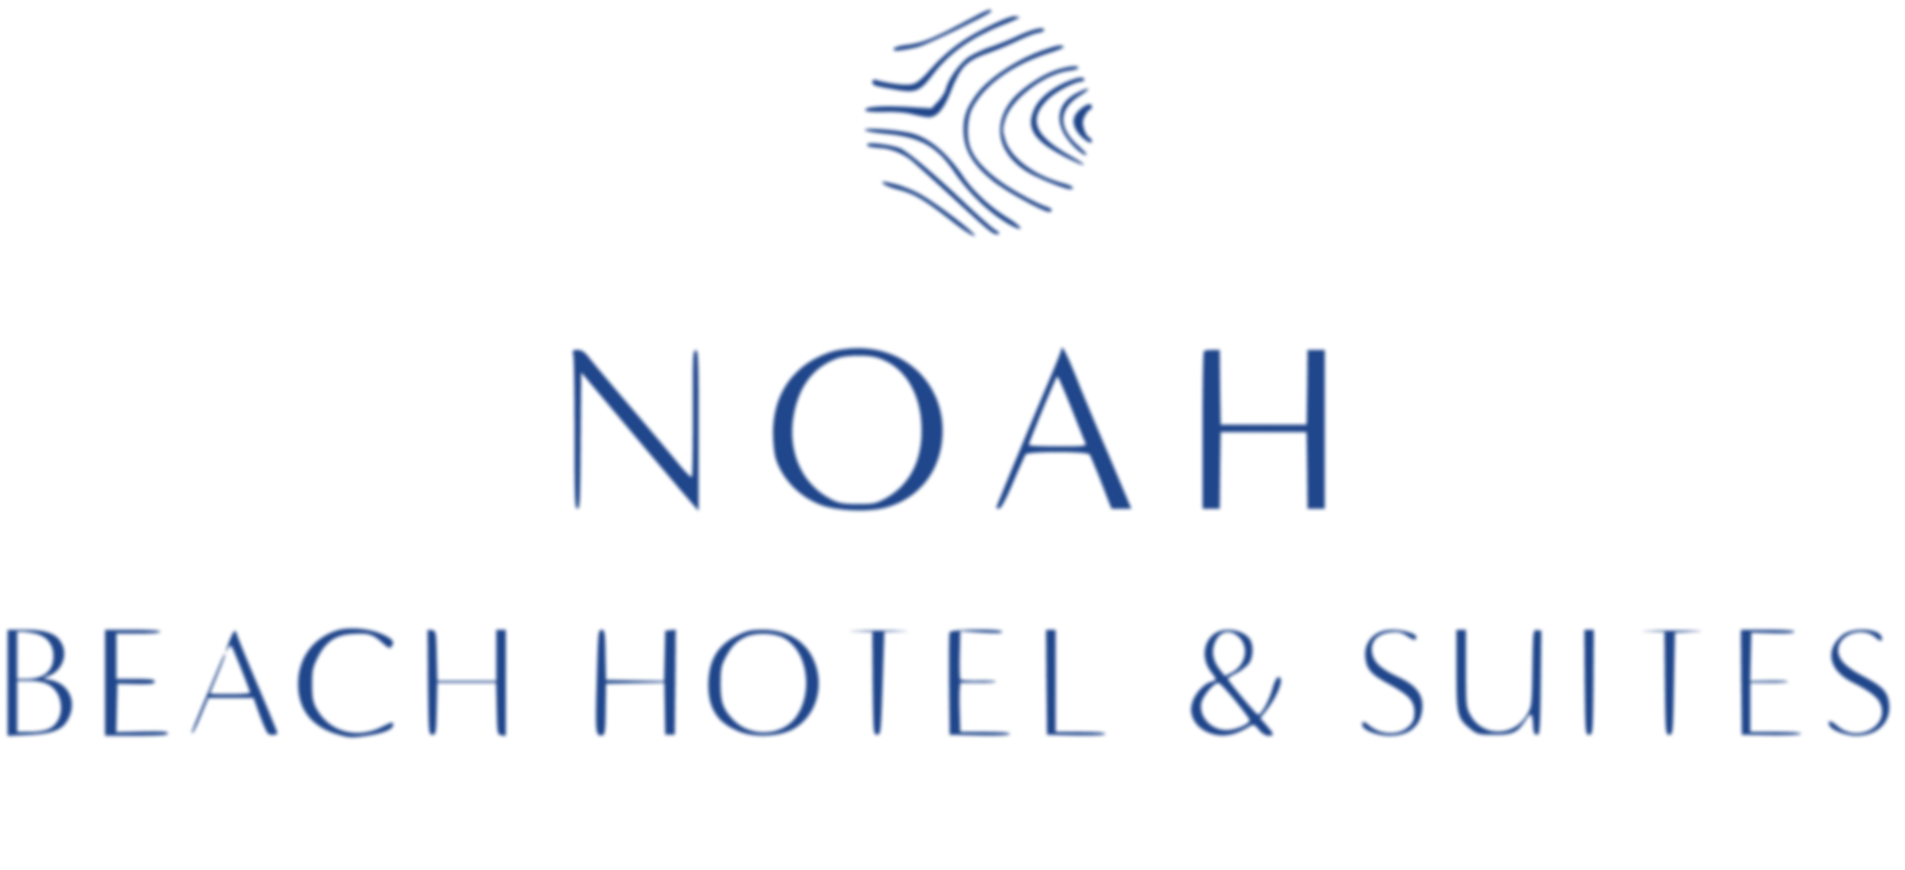 Noah Beach Hotel and Suites